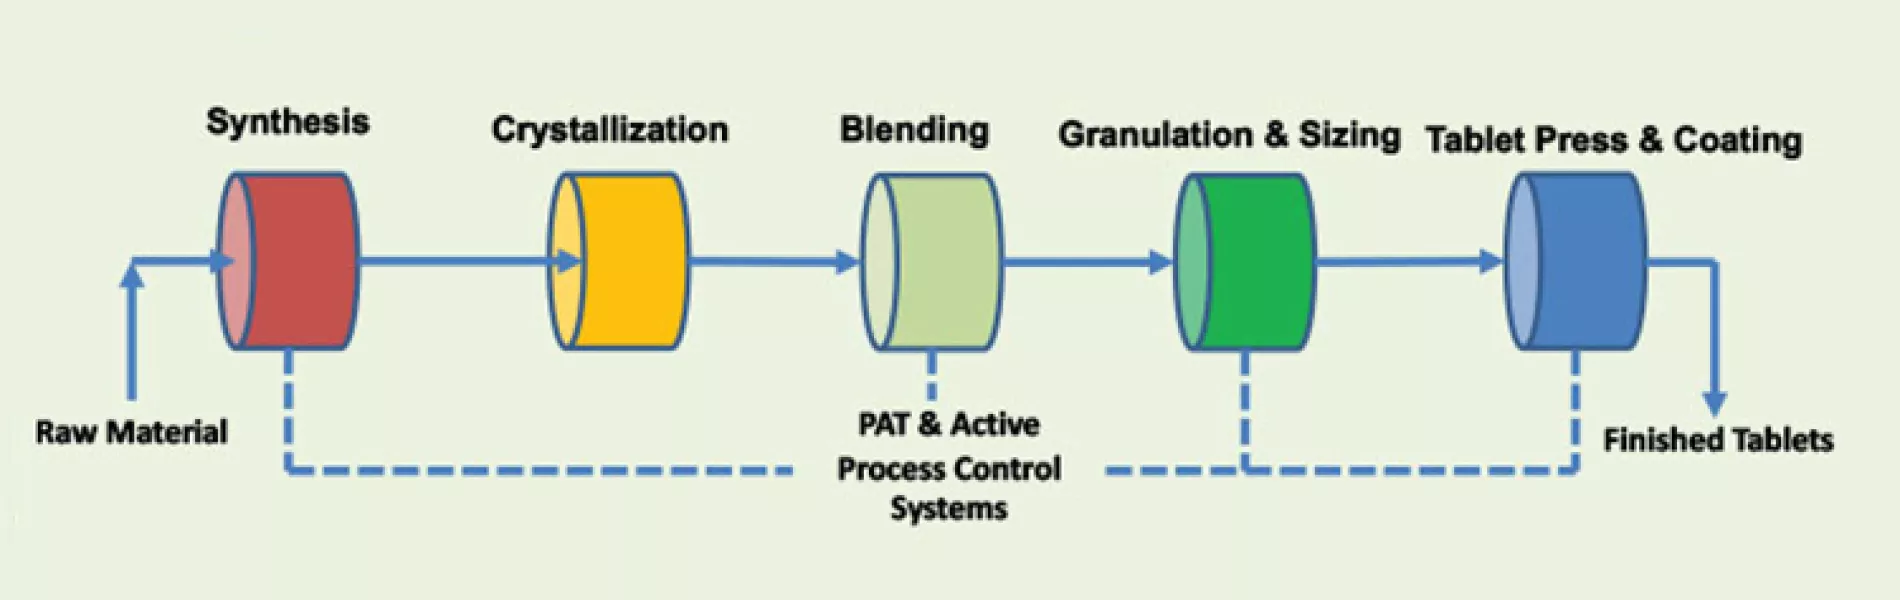 Quality & Regulatory Solutions for PAT in Continuous Manufacturing